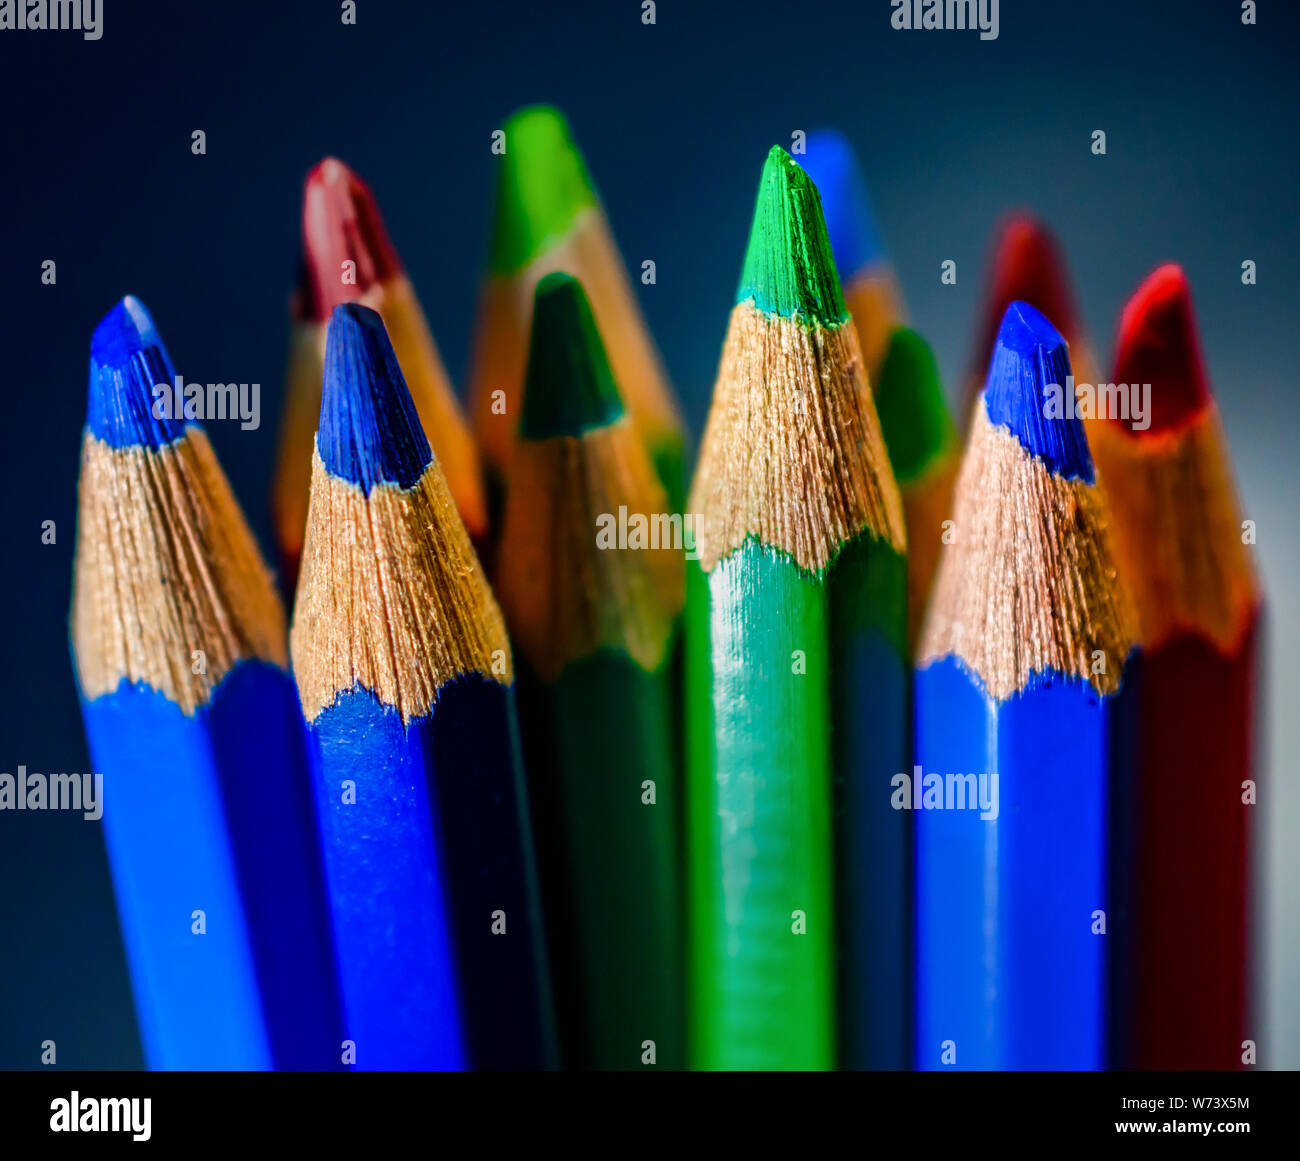 Closeup of brightly colored pencils tips with grainy wooden texture Stock Photo